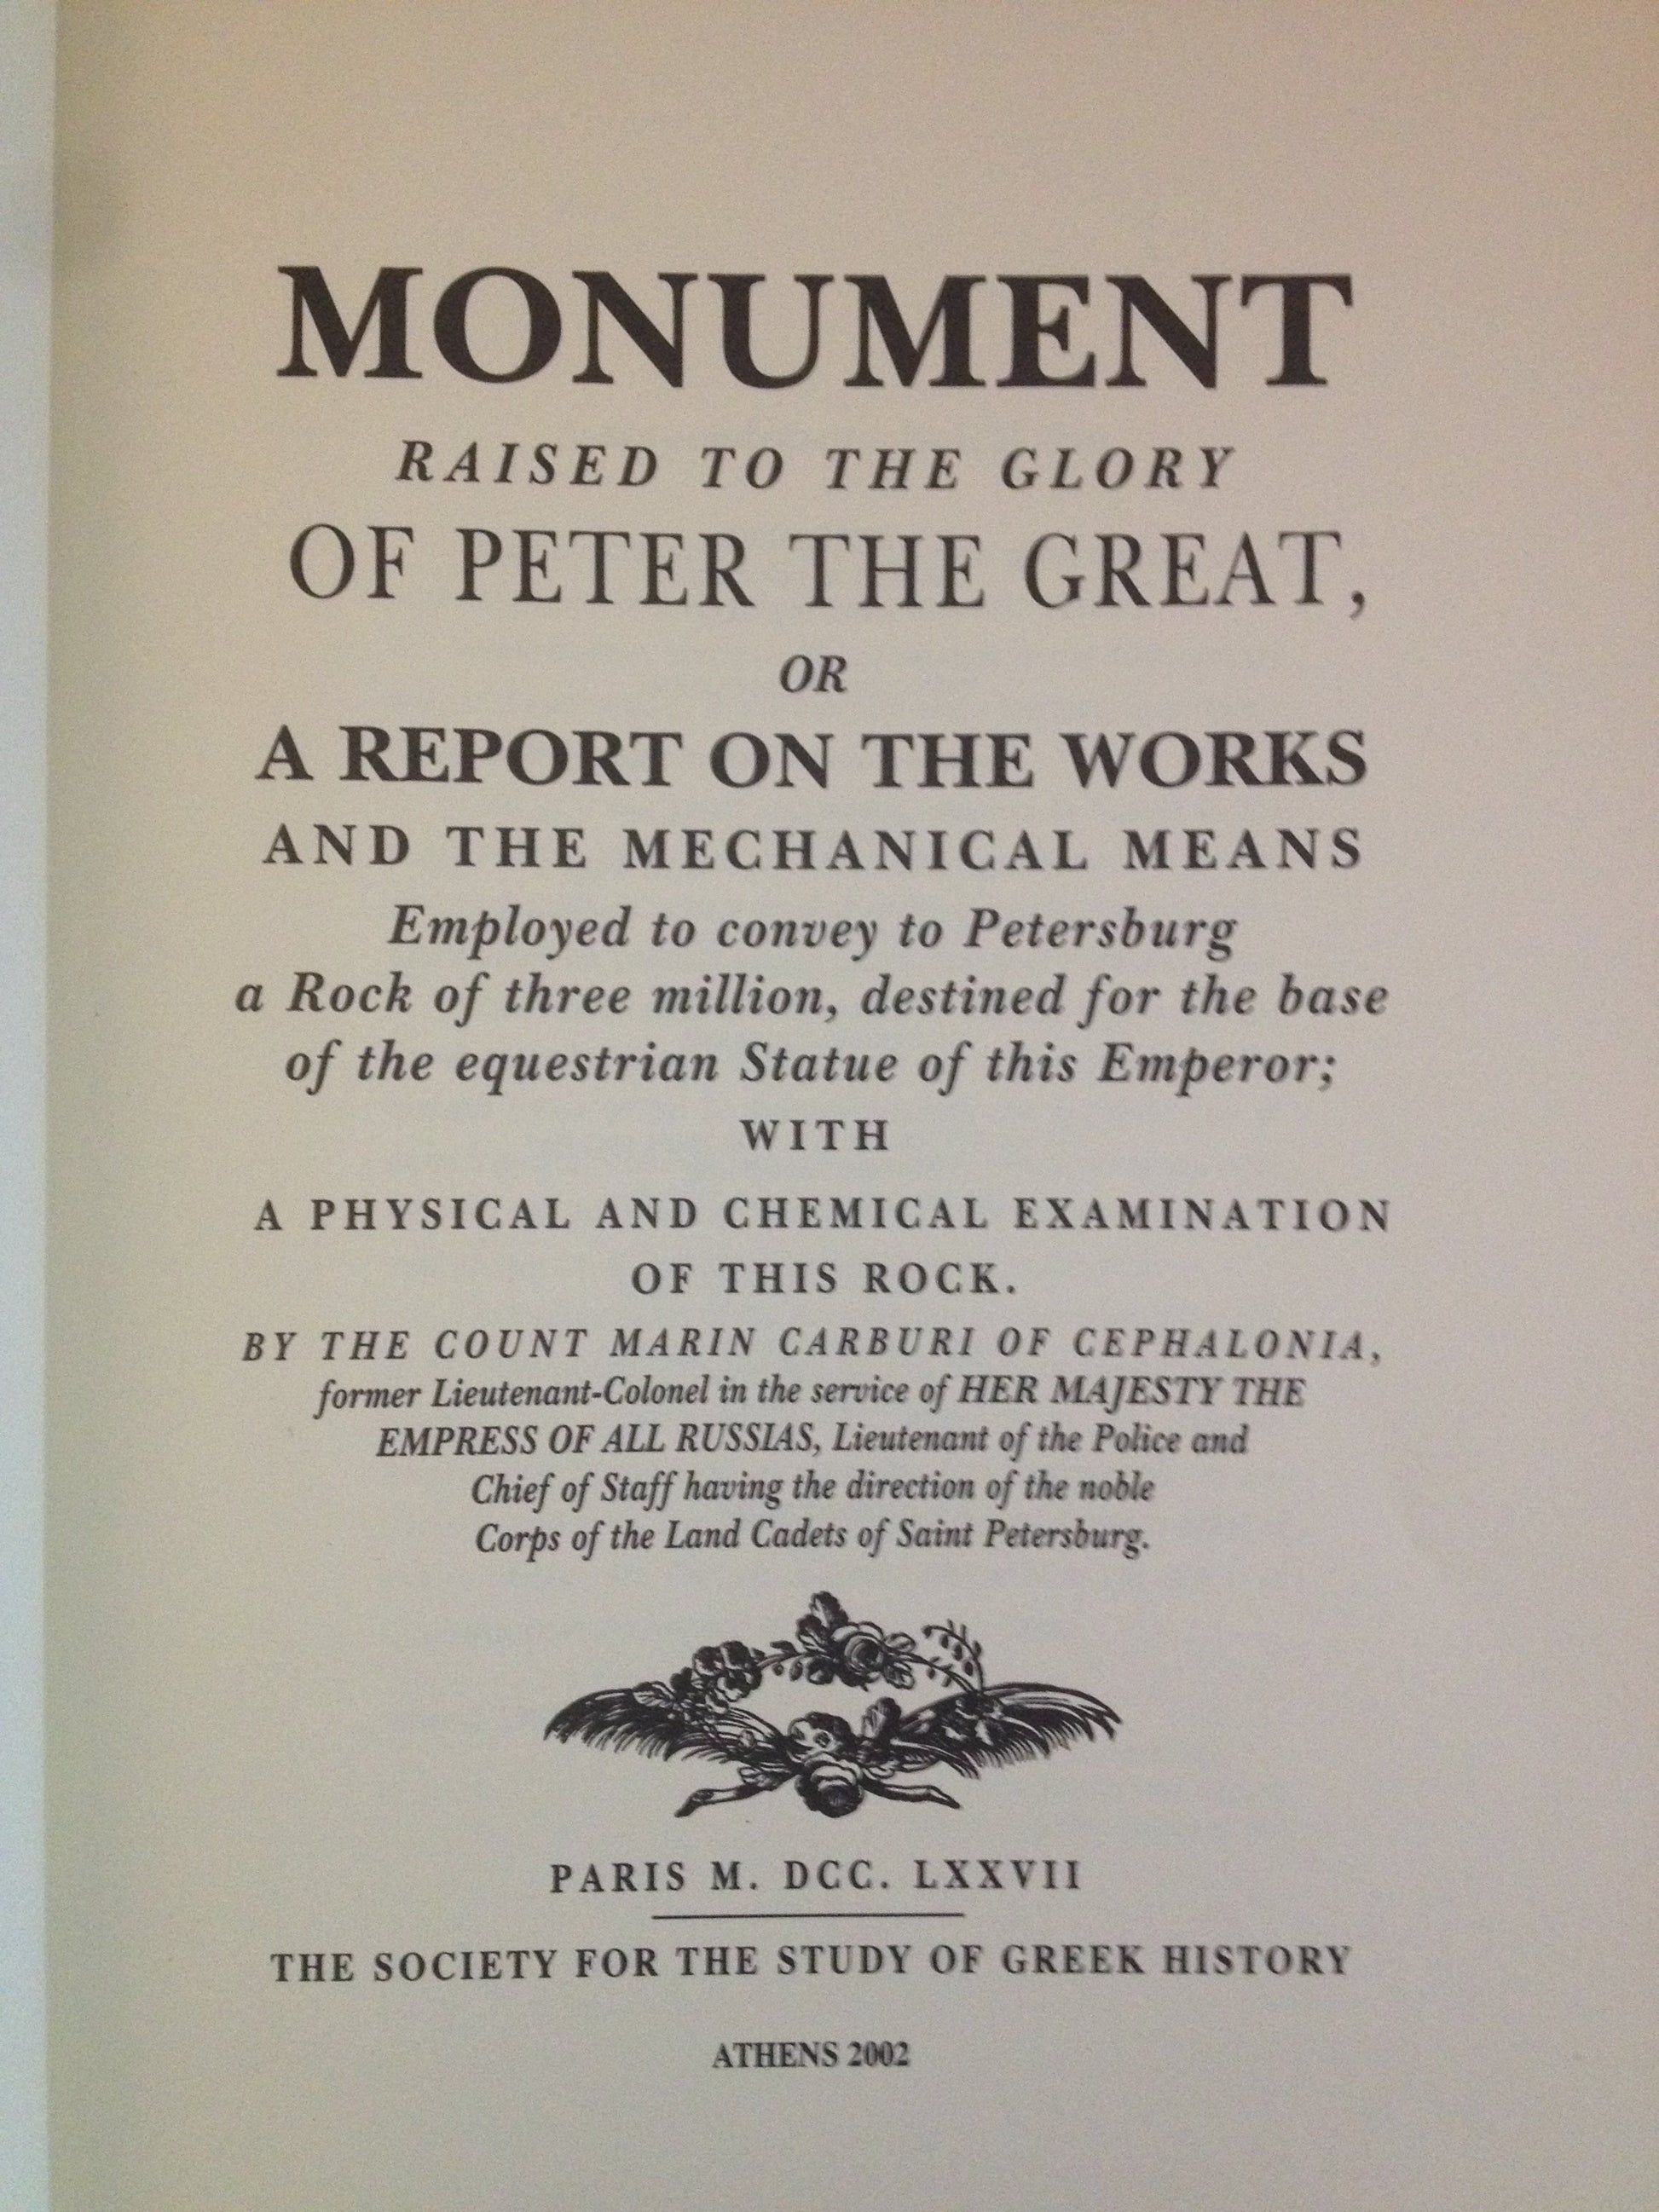 MONUMENT RAISED TO THE GLORY OF PETER THE GREAT BY: COUNT MARIN CARBURI OF CEPHALONIA BooksCardsNBikes